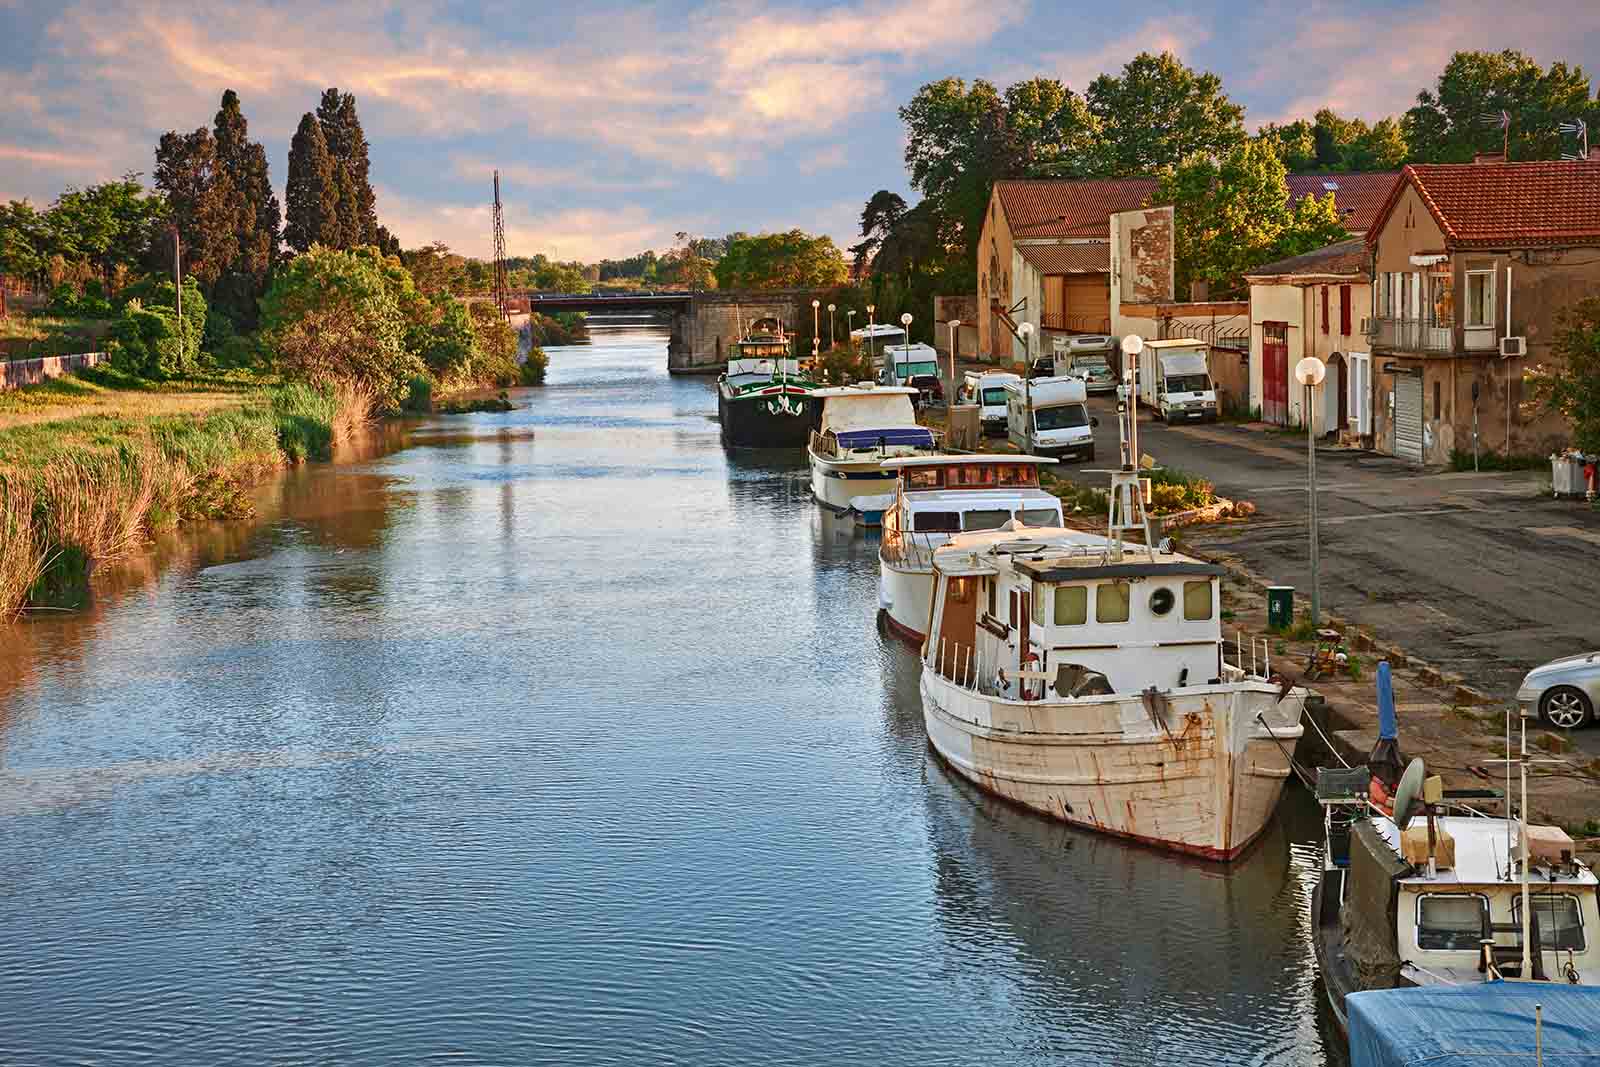 Boating holidays in Camargue, France, are popular | Why slow travel is gaining momentum